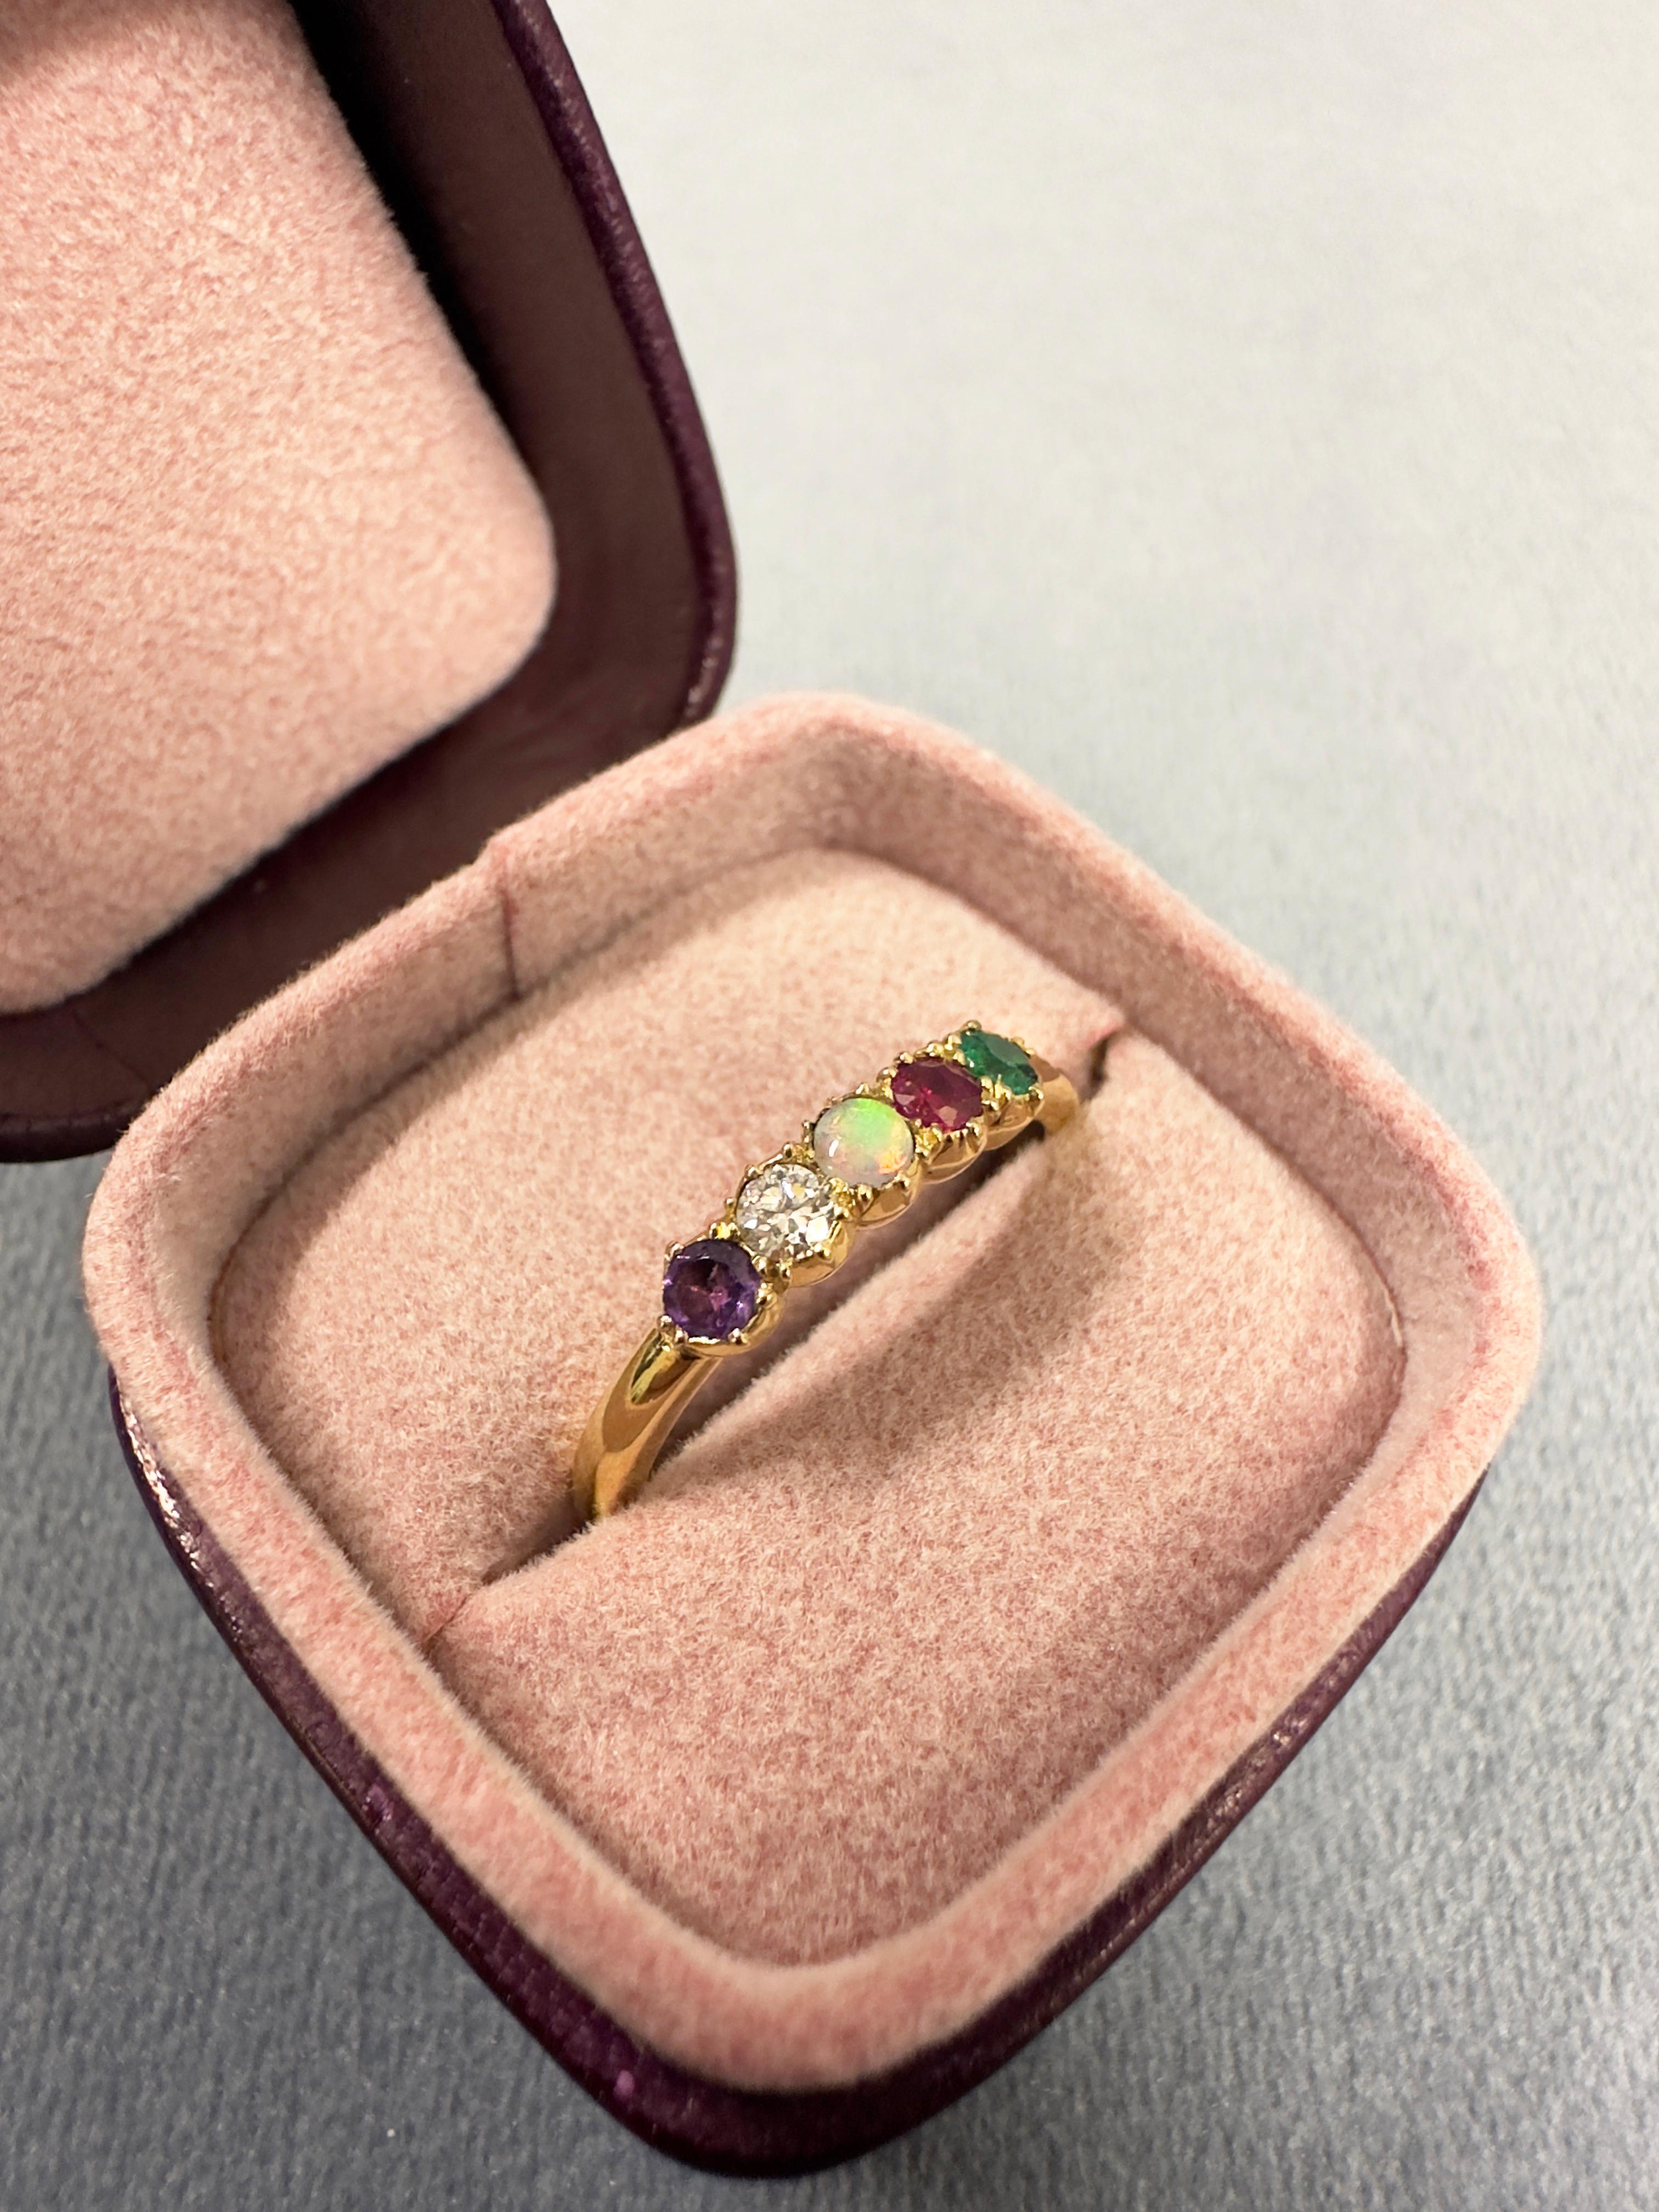 This very pretty ring hides a secret acrostic message, meaning the first letter of each gemstone spells out a word. In this case, there's an Amethyst, Diamond, Opal, Ruby, and Emerald to spell out the word 